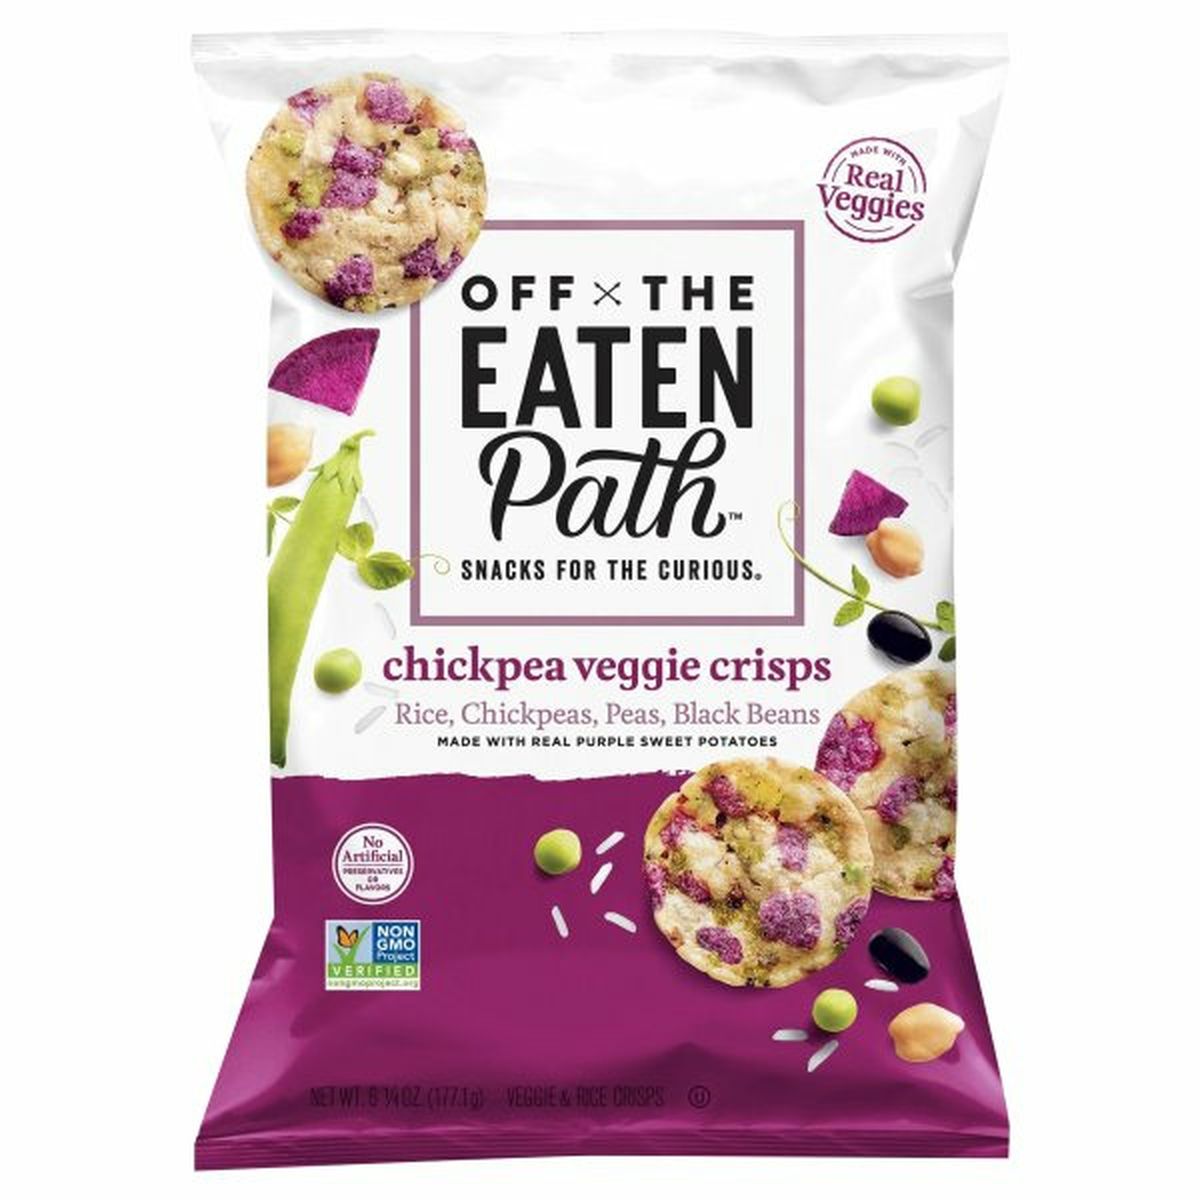 Calories in Off The Eaten Path Veggie Crisps, Rice Chickpea Peas Black Beans with Purple Sweet Potatoes